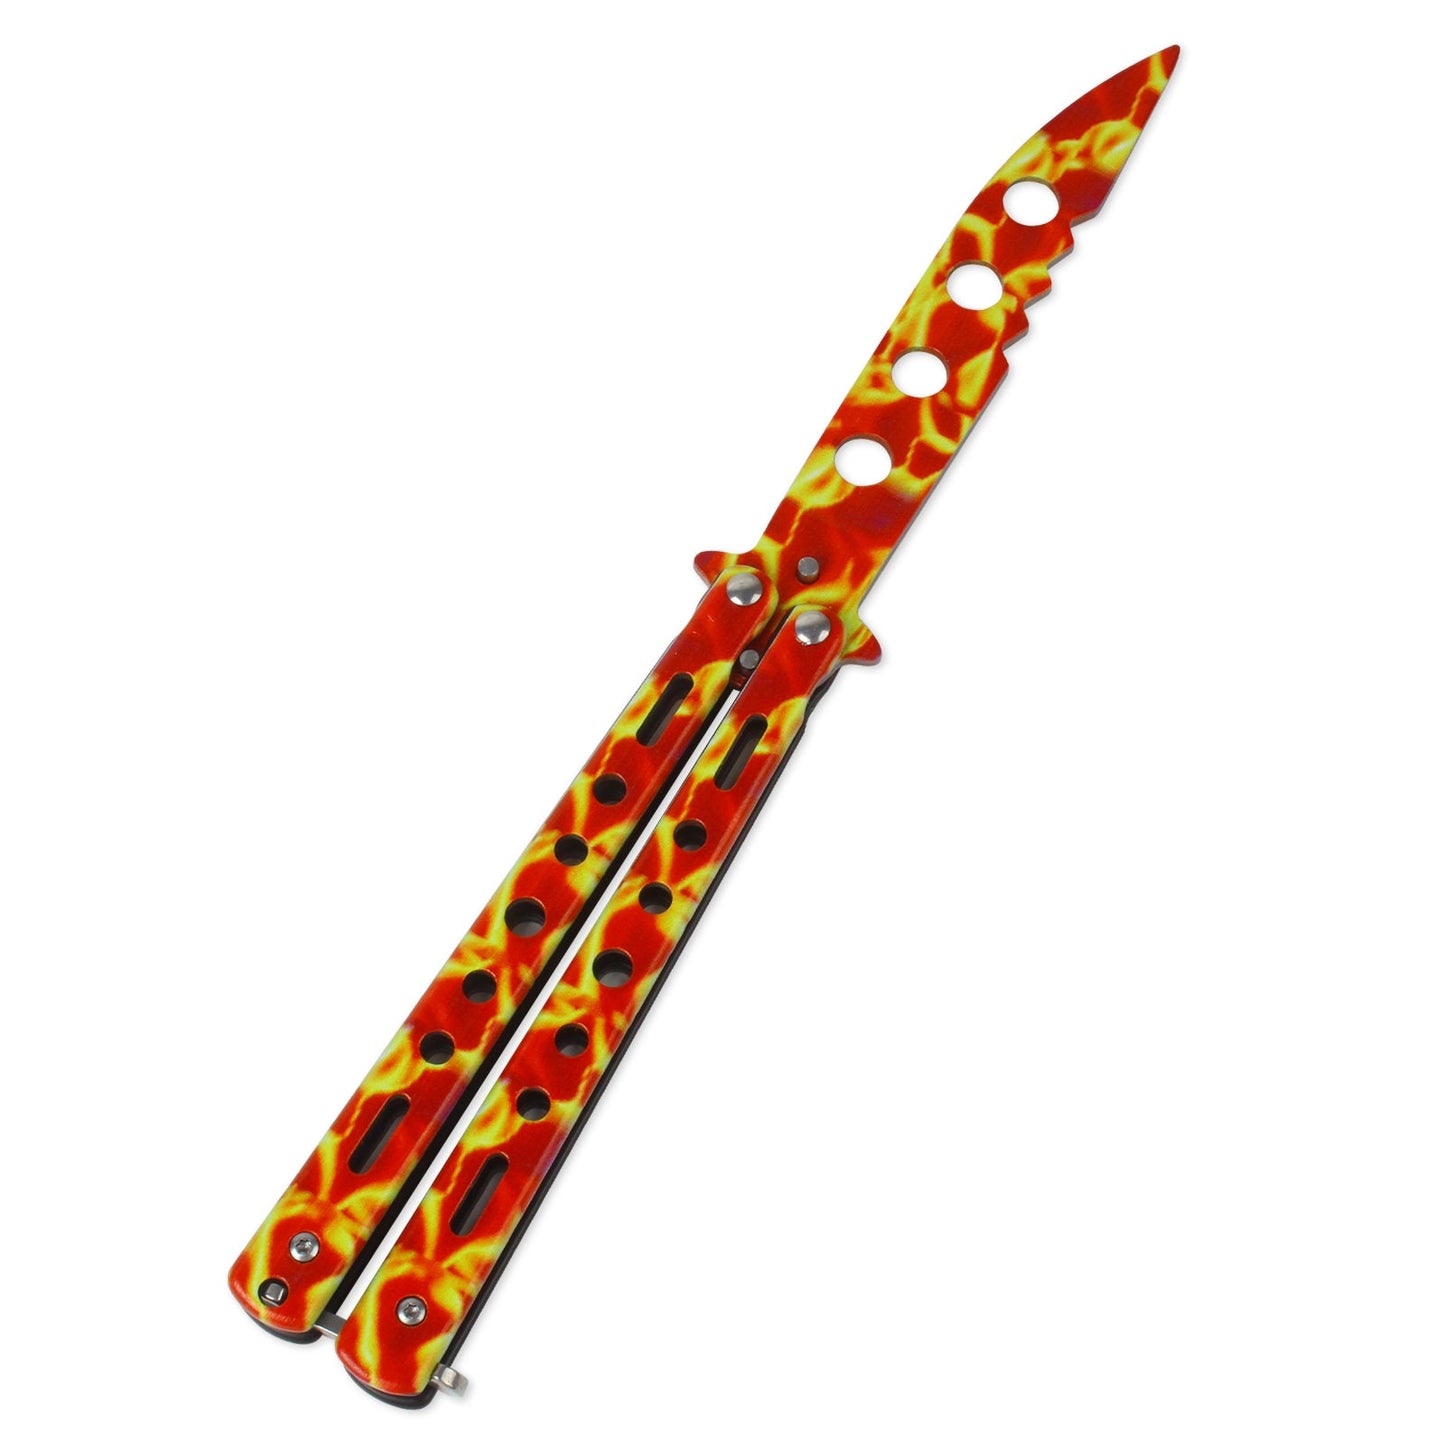 Andux Balisong Butterfly Knife Practice Knives Training Tool (Red + Yellow) BLCS581